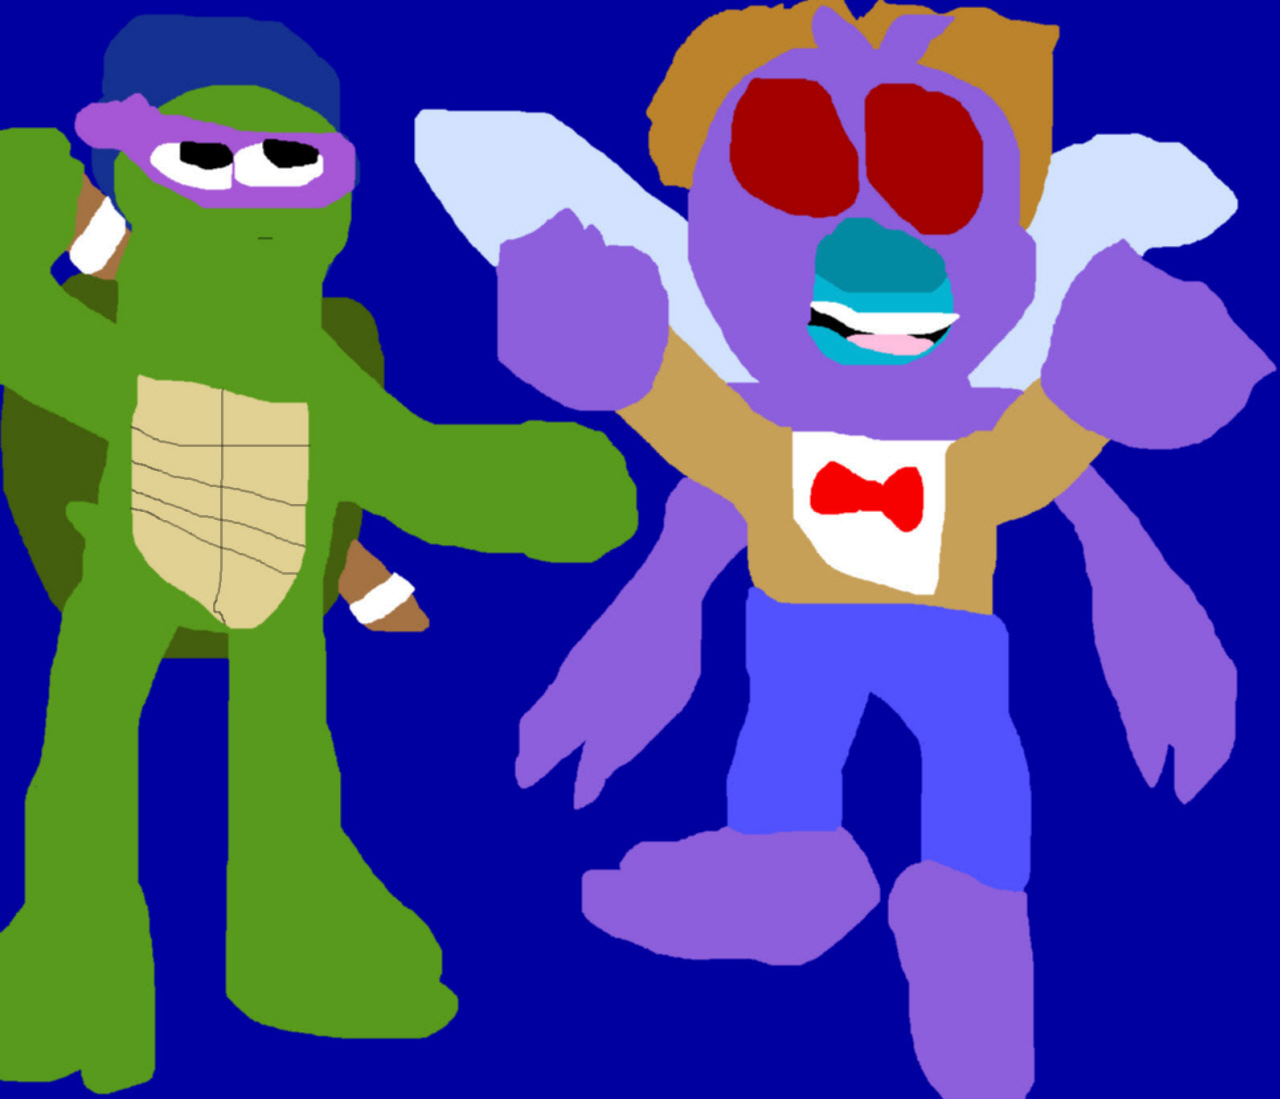 Scientist Turtle Vs Mad Scientist Fly Ms Paint by Falconlobo